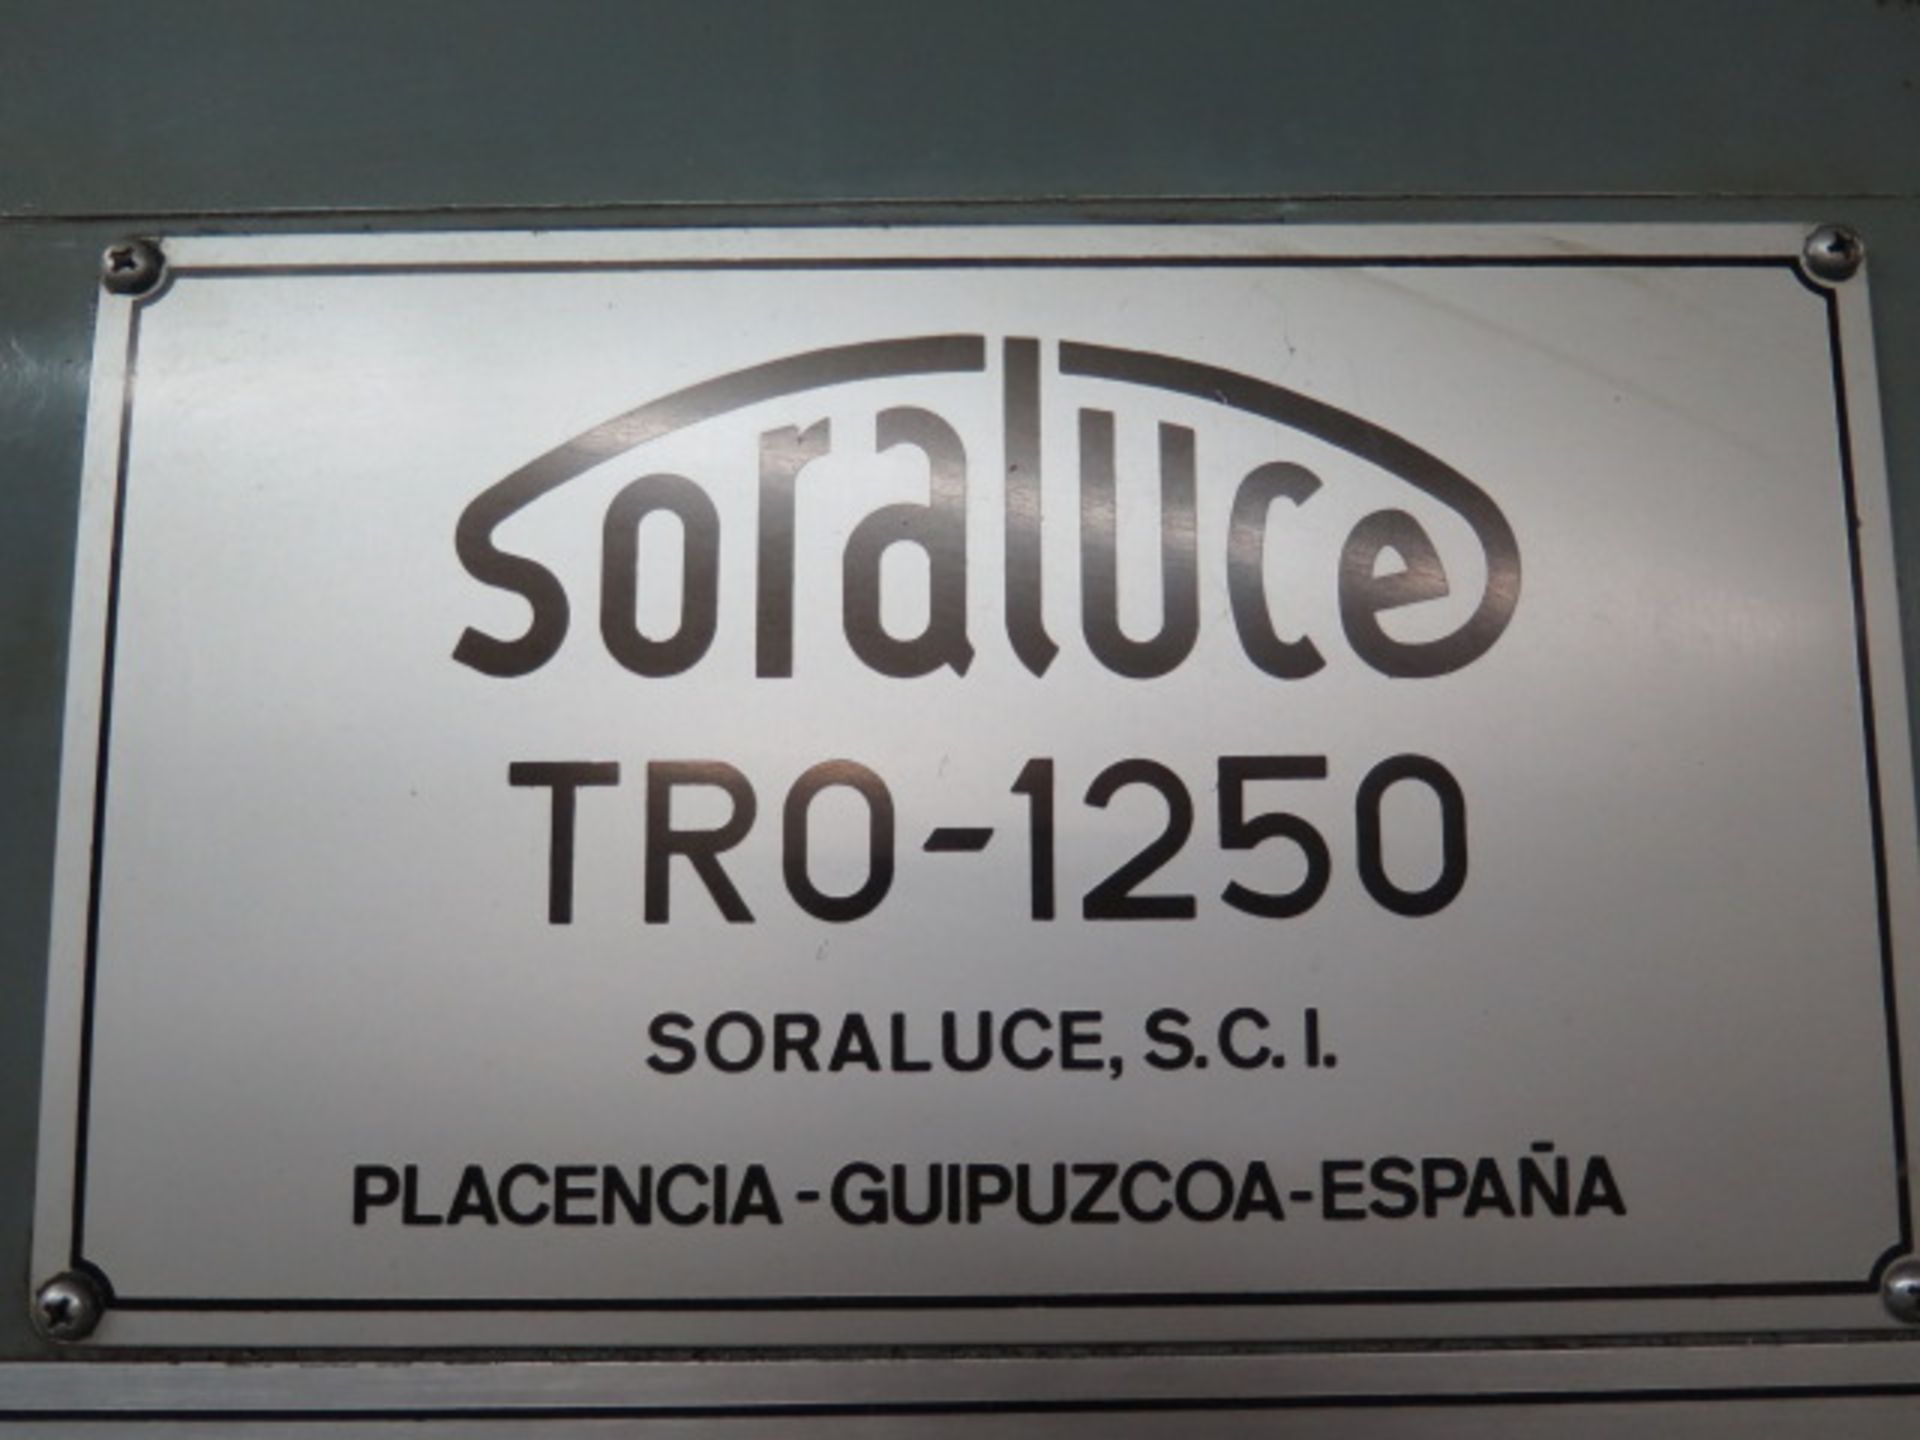 Soraluce TR0-1250 11” Column x 36” Radial Arm Drill s/n 3208-10208 w/ 29-1700 RPM, SOLD AS IS - Image 10 of 10